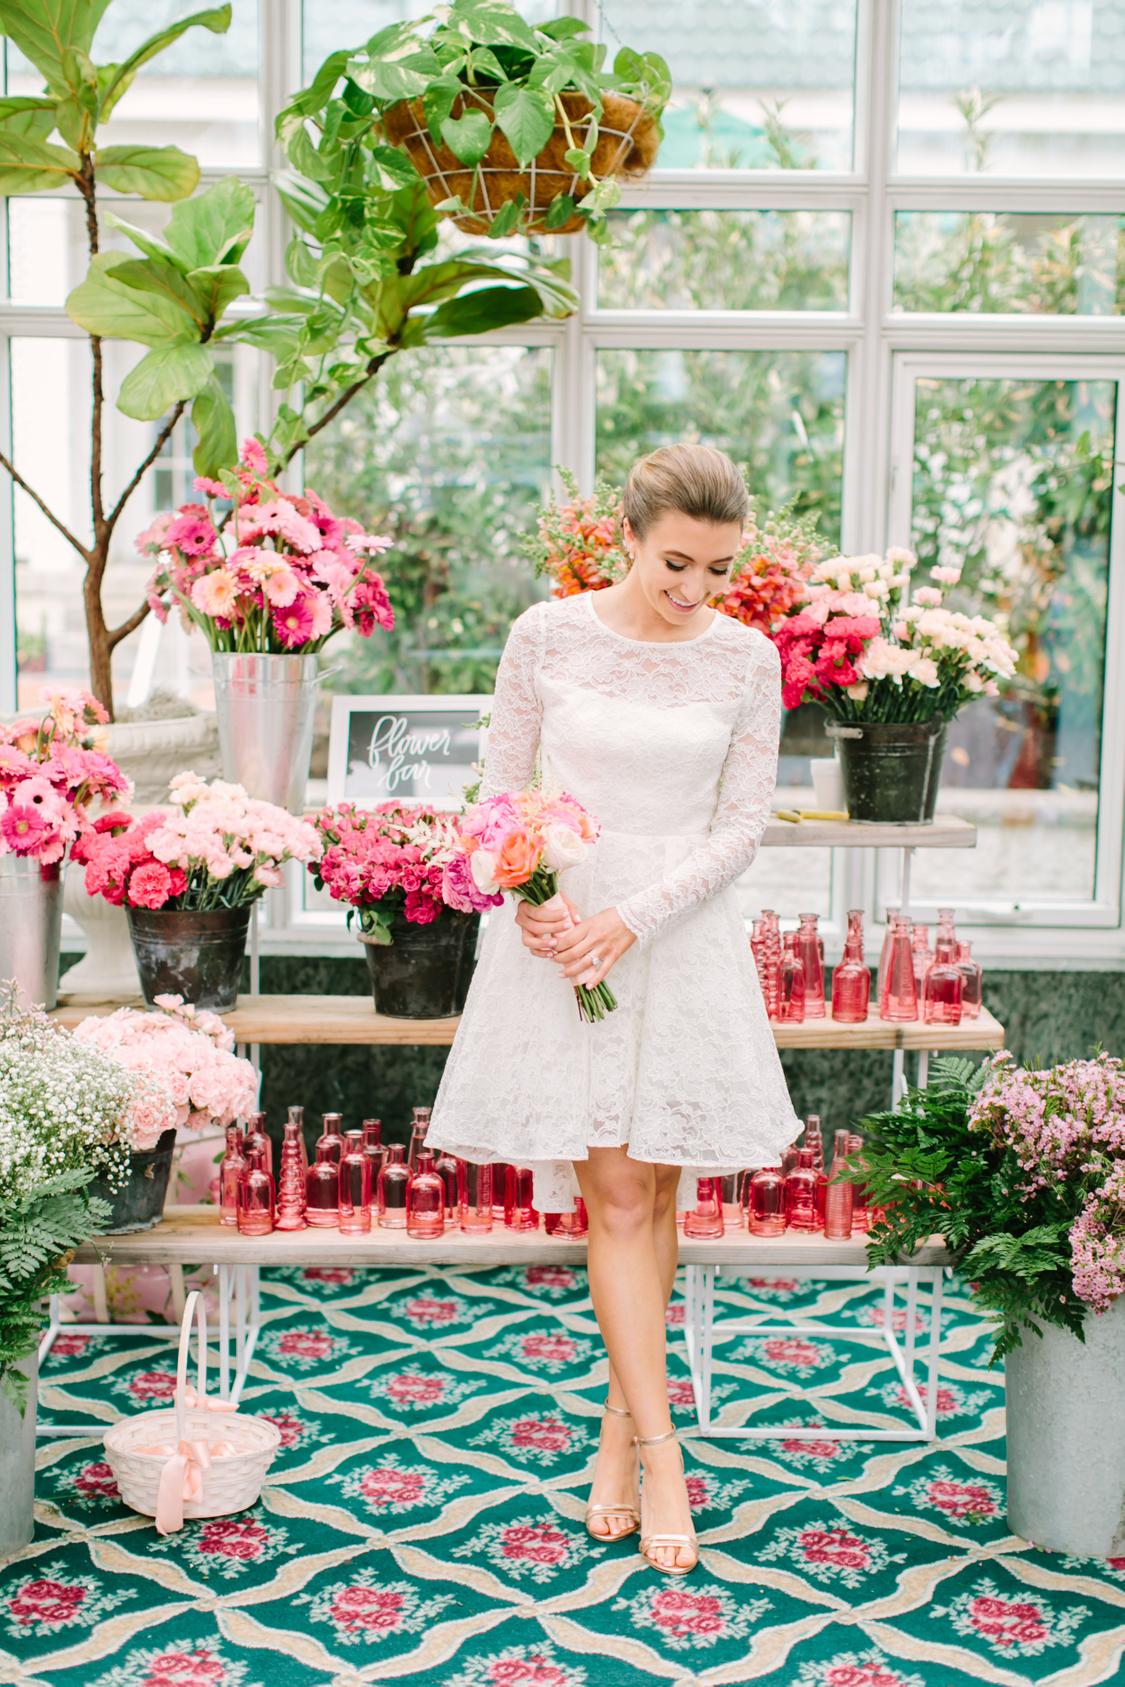 Why Flower Bars Are The New It Bridal